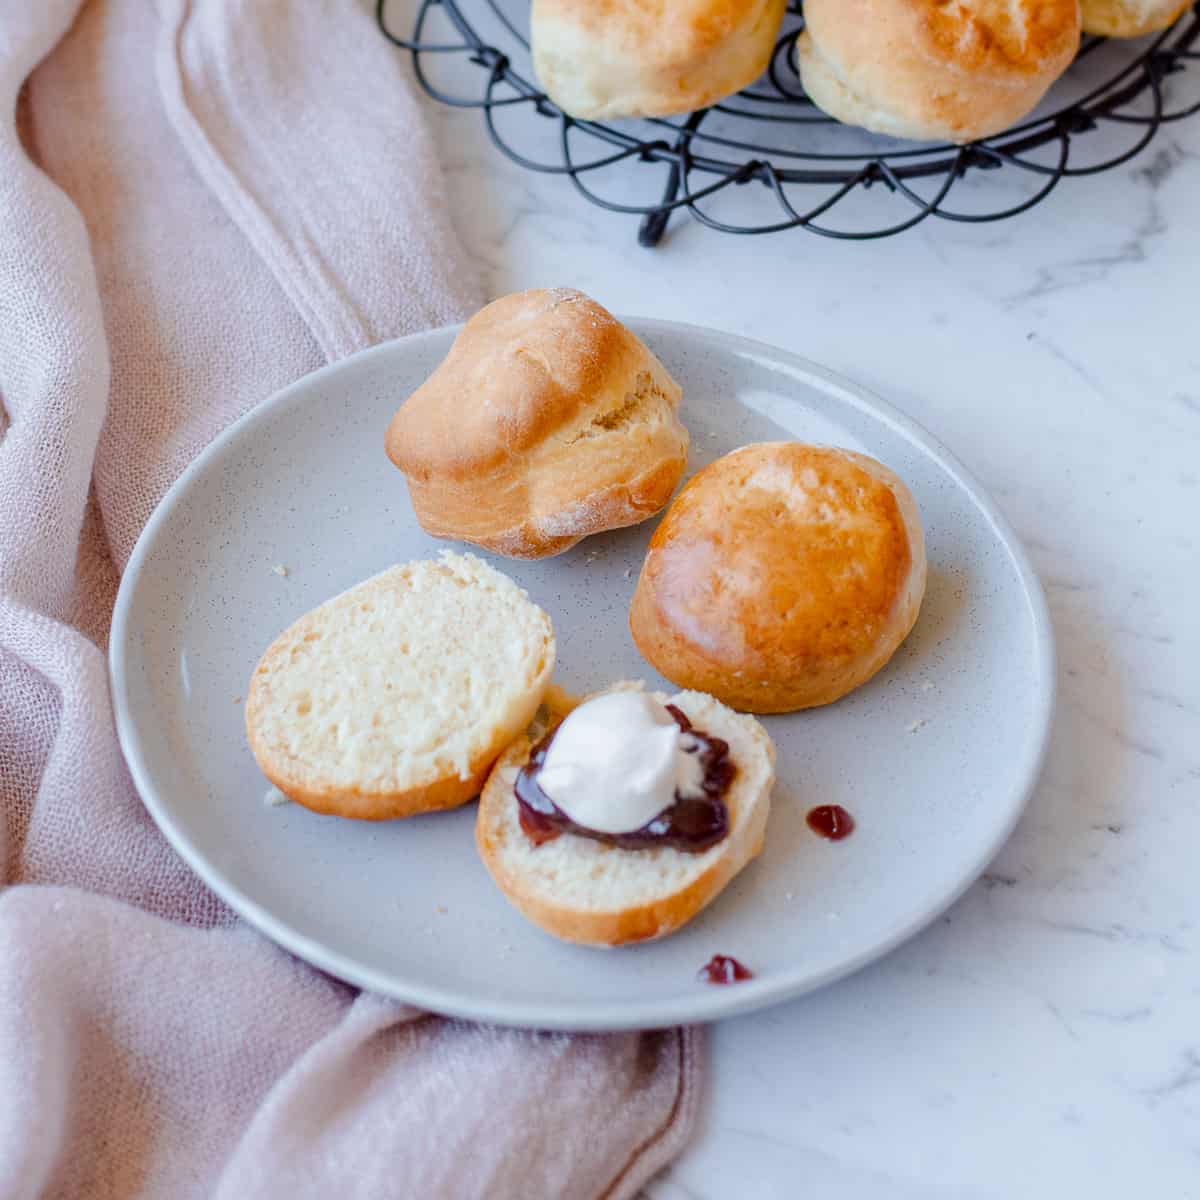 Lemonade scones on a blue plate with cream and jam